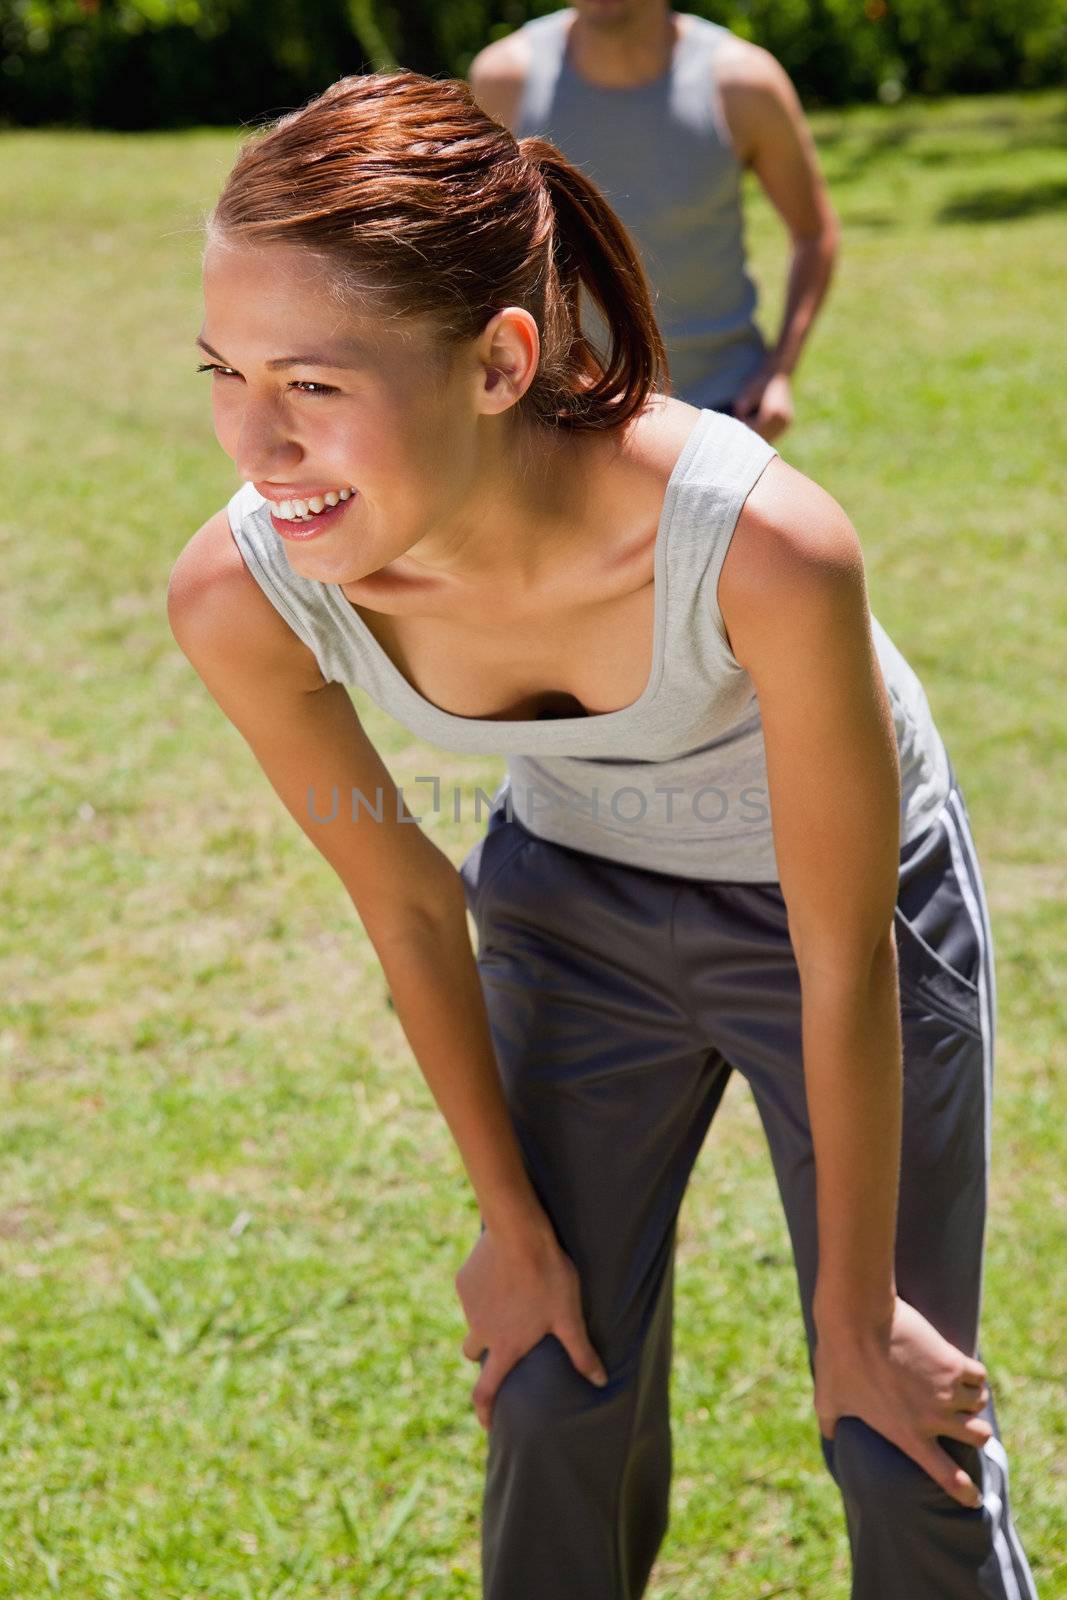 Woman smiling while bending over to recover as a man is walking close behind her